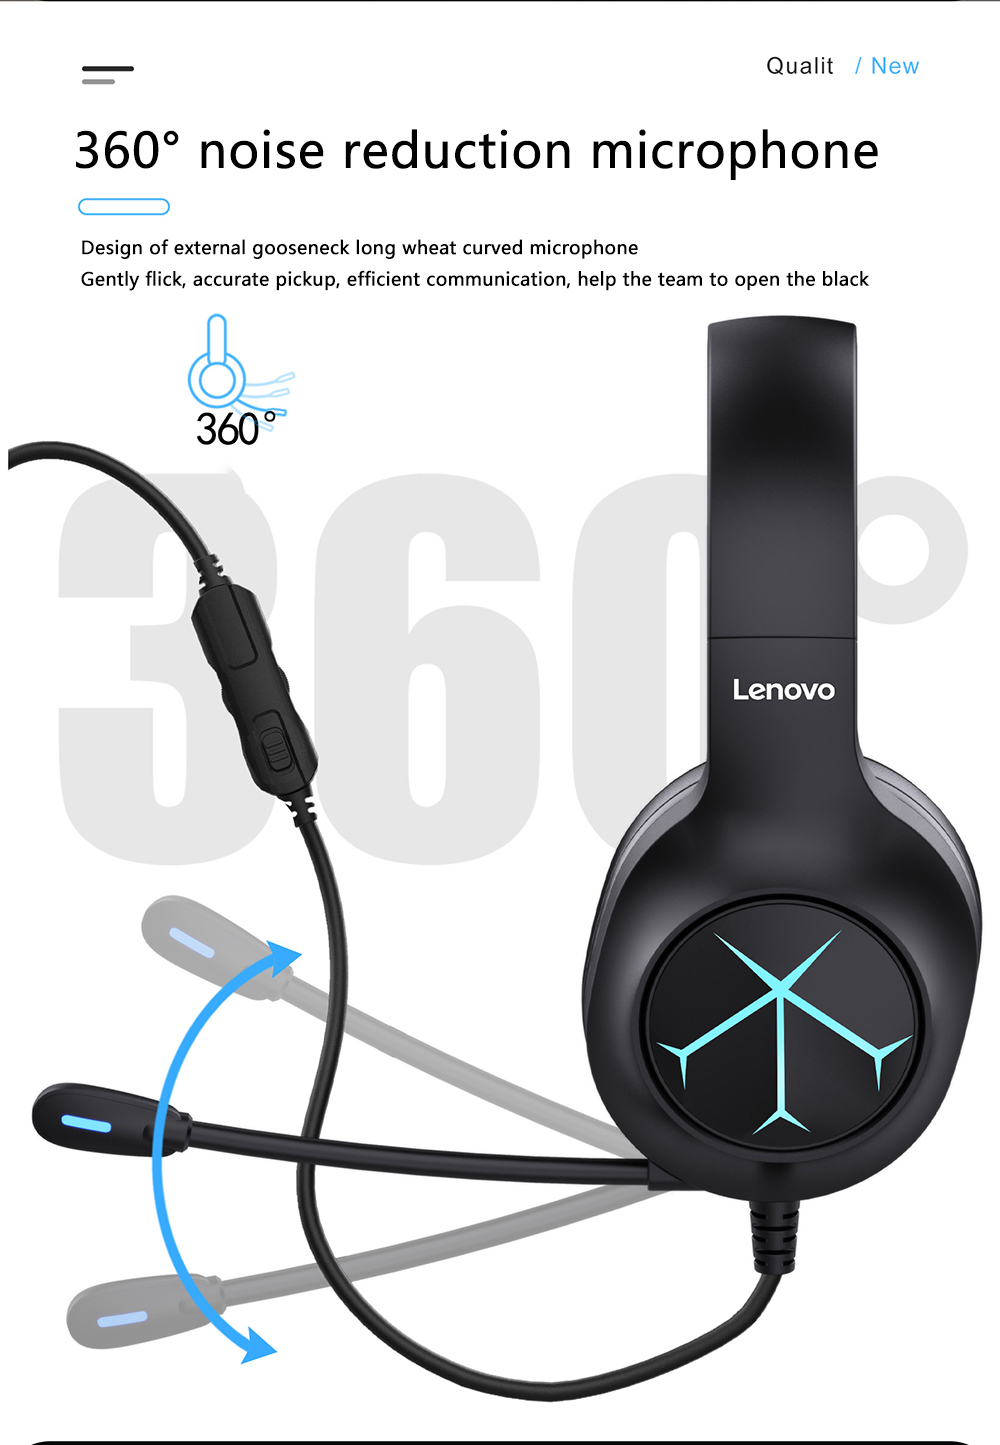 Lenovo-G60-Wired-Headset-71-Stereo-Blue-Light-Over-Ear-Gaming-Headphone-with-Mic-Noise-Canceling-USB-1896835-6